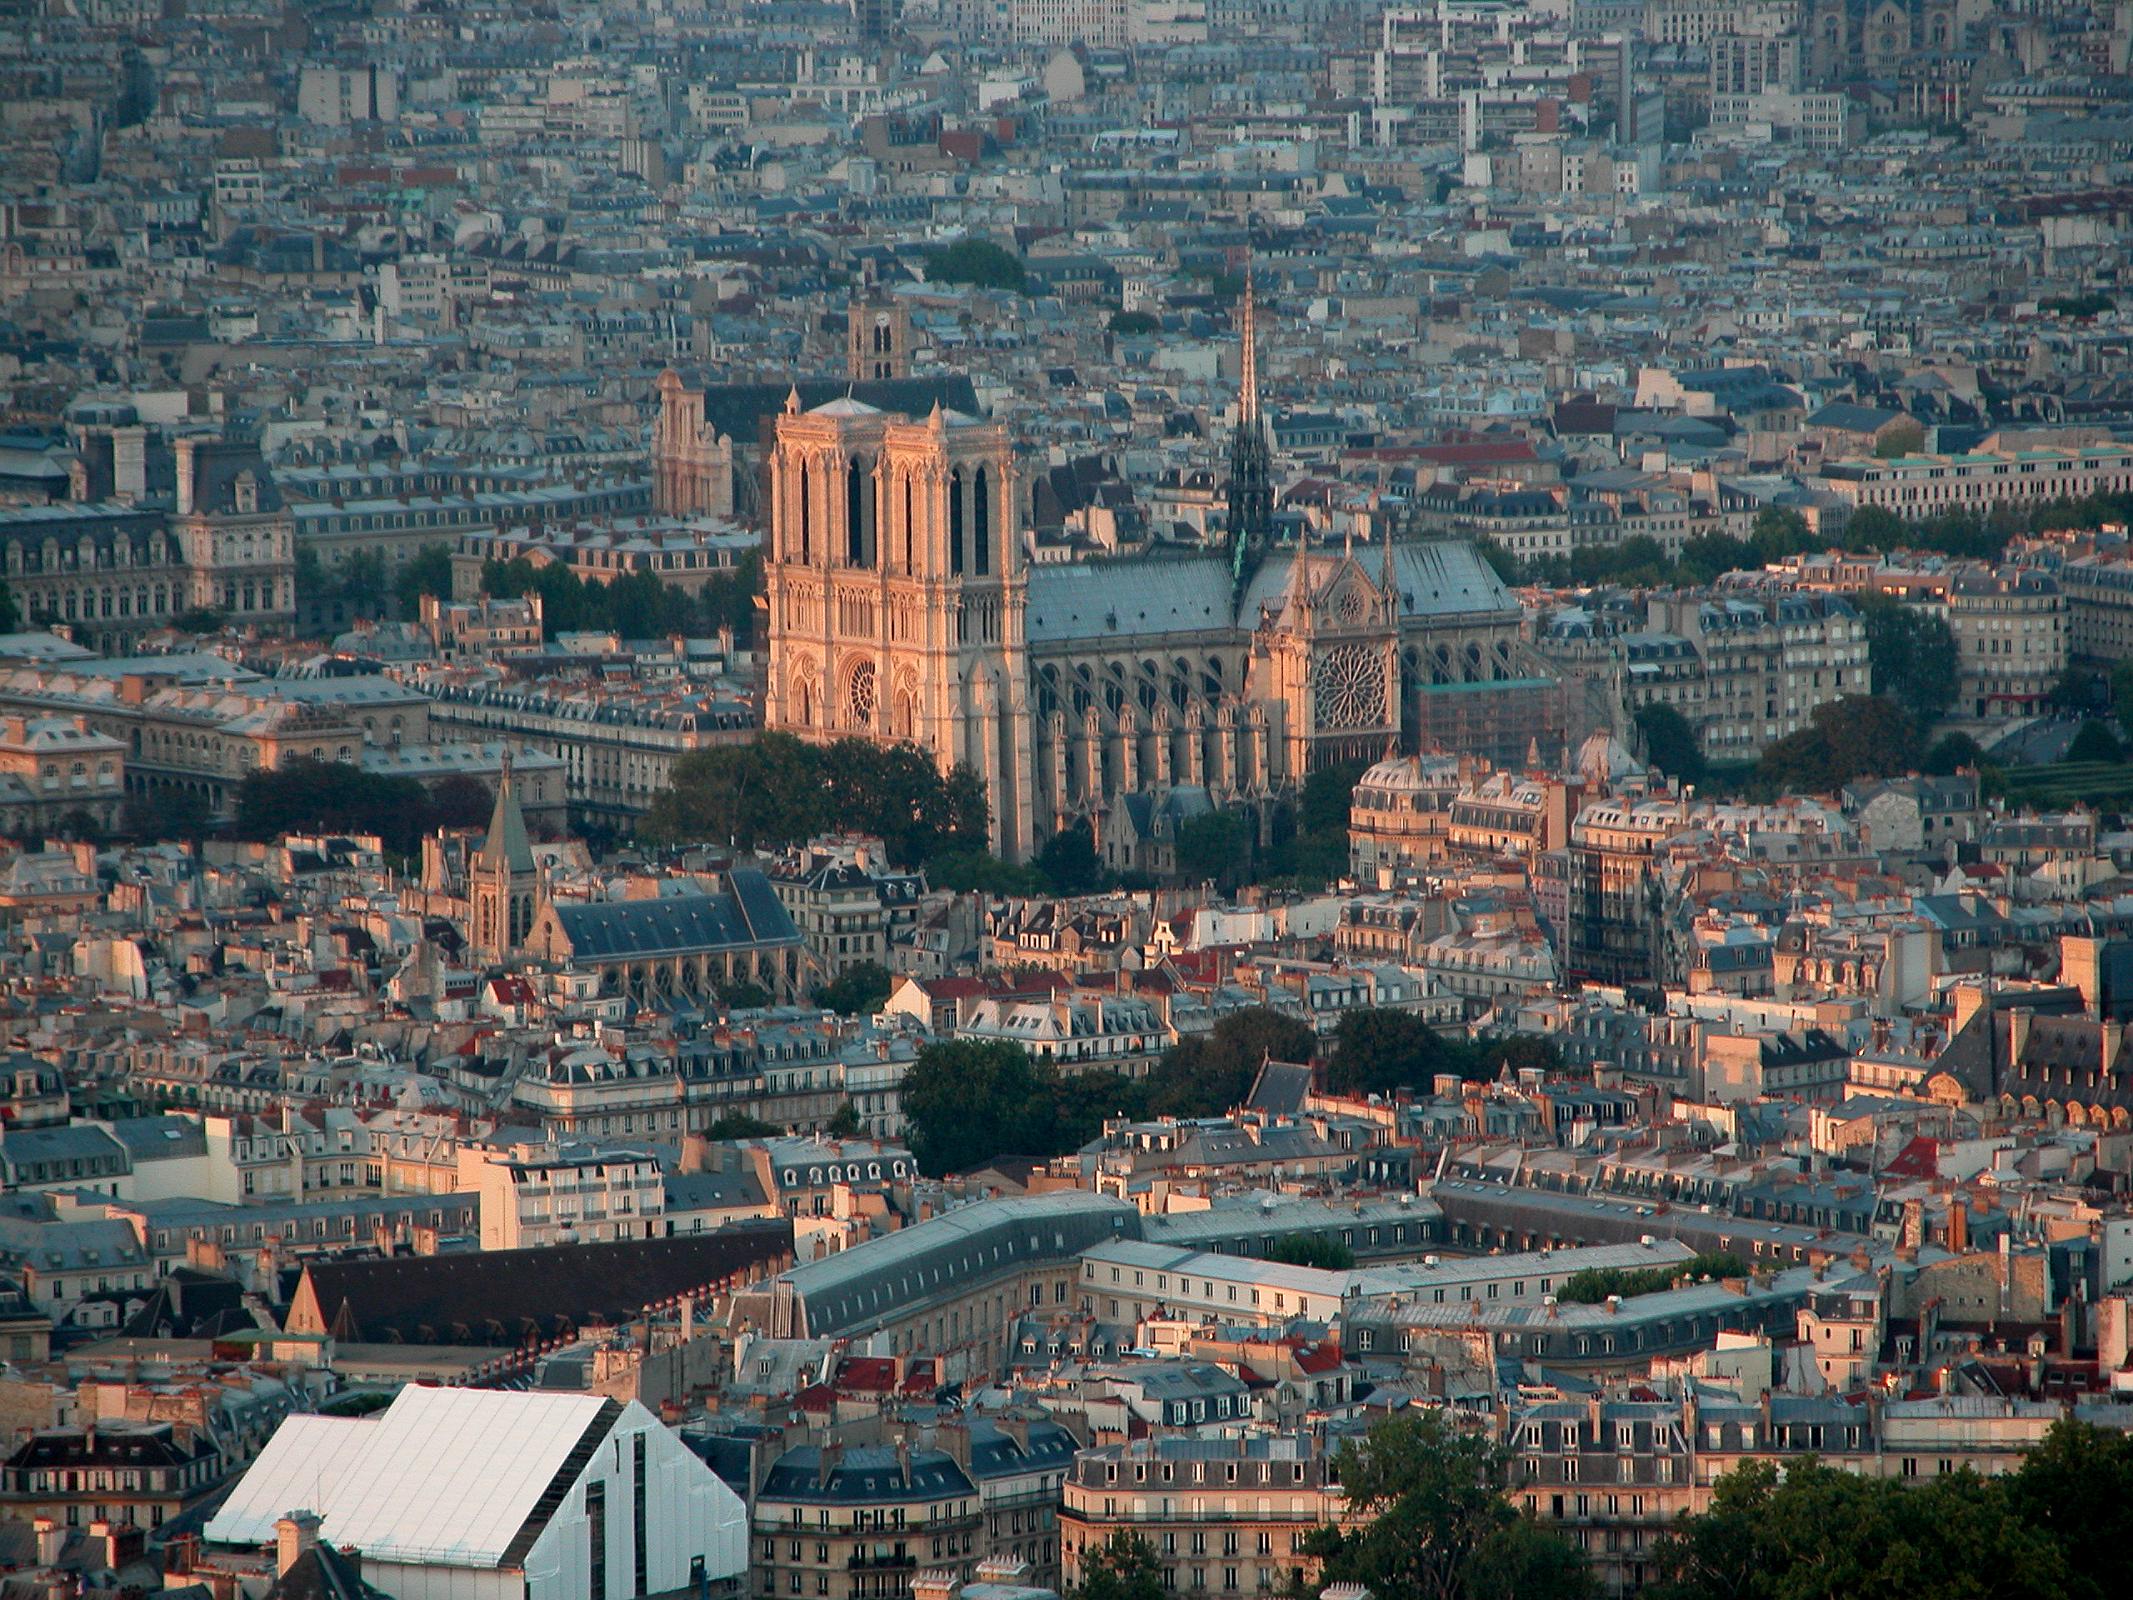 Paris 02 Notre Dame At Sunset From Montparnasse Tower 